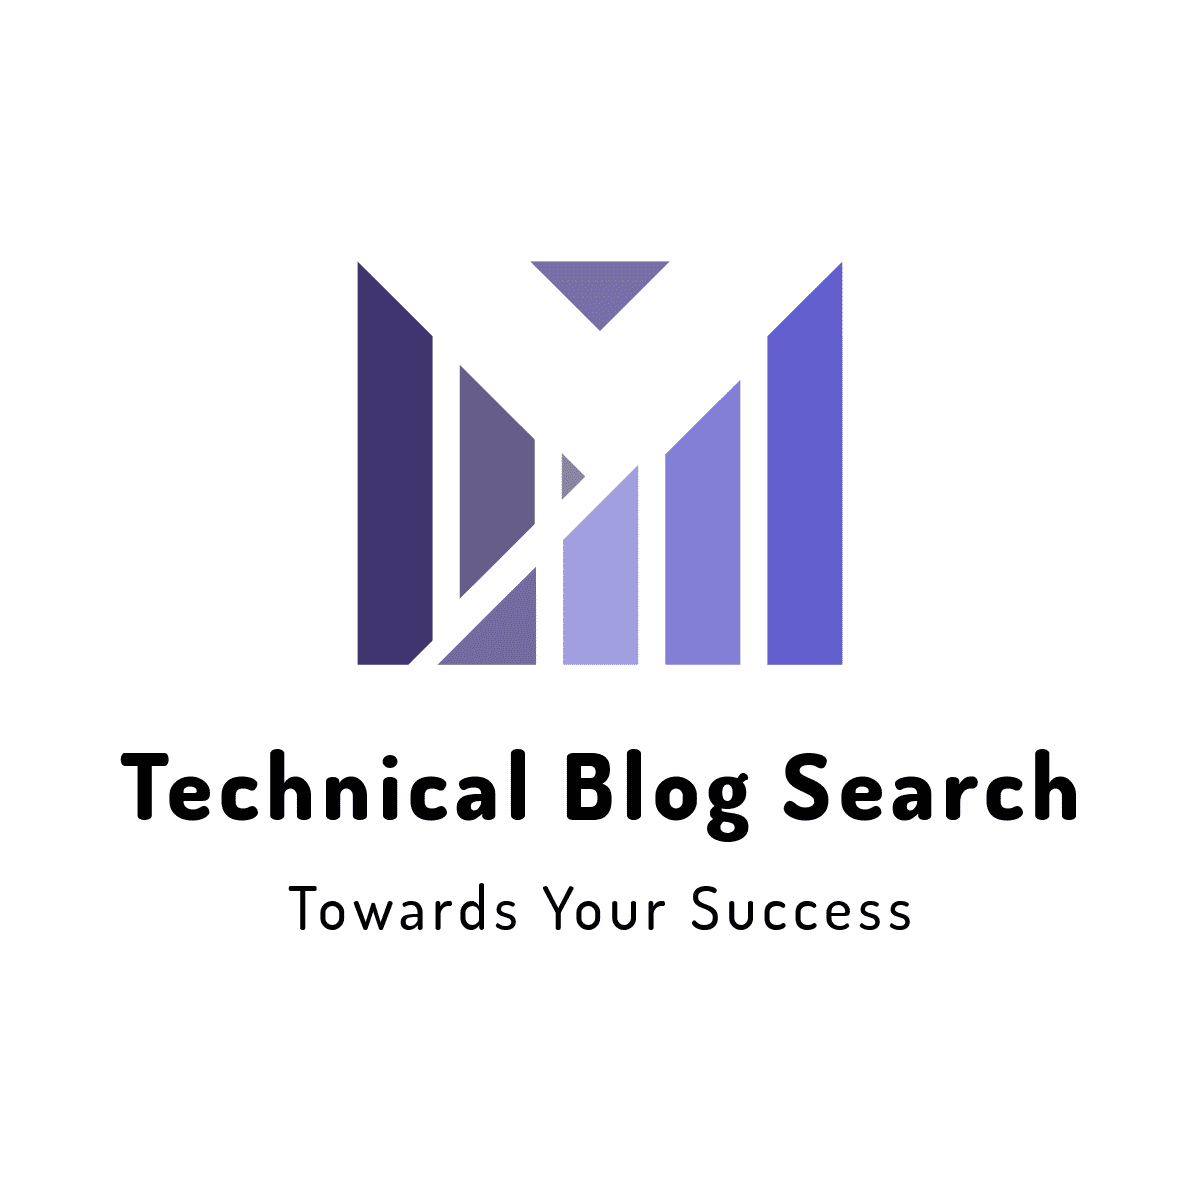 Technical Blog Search